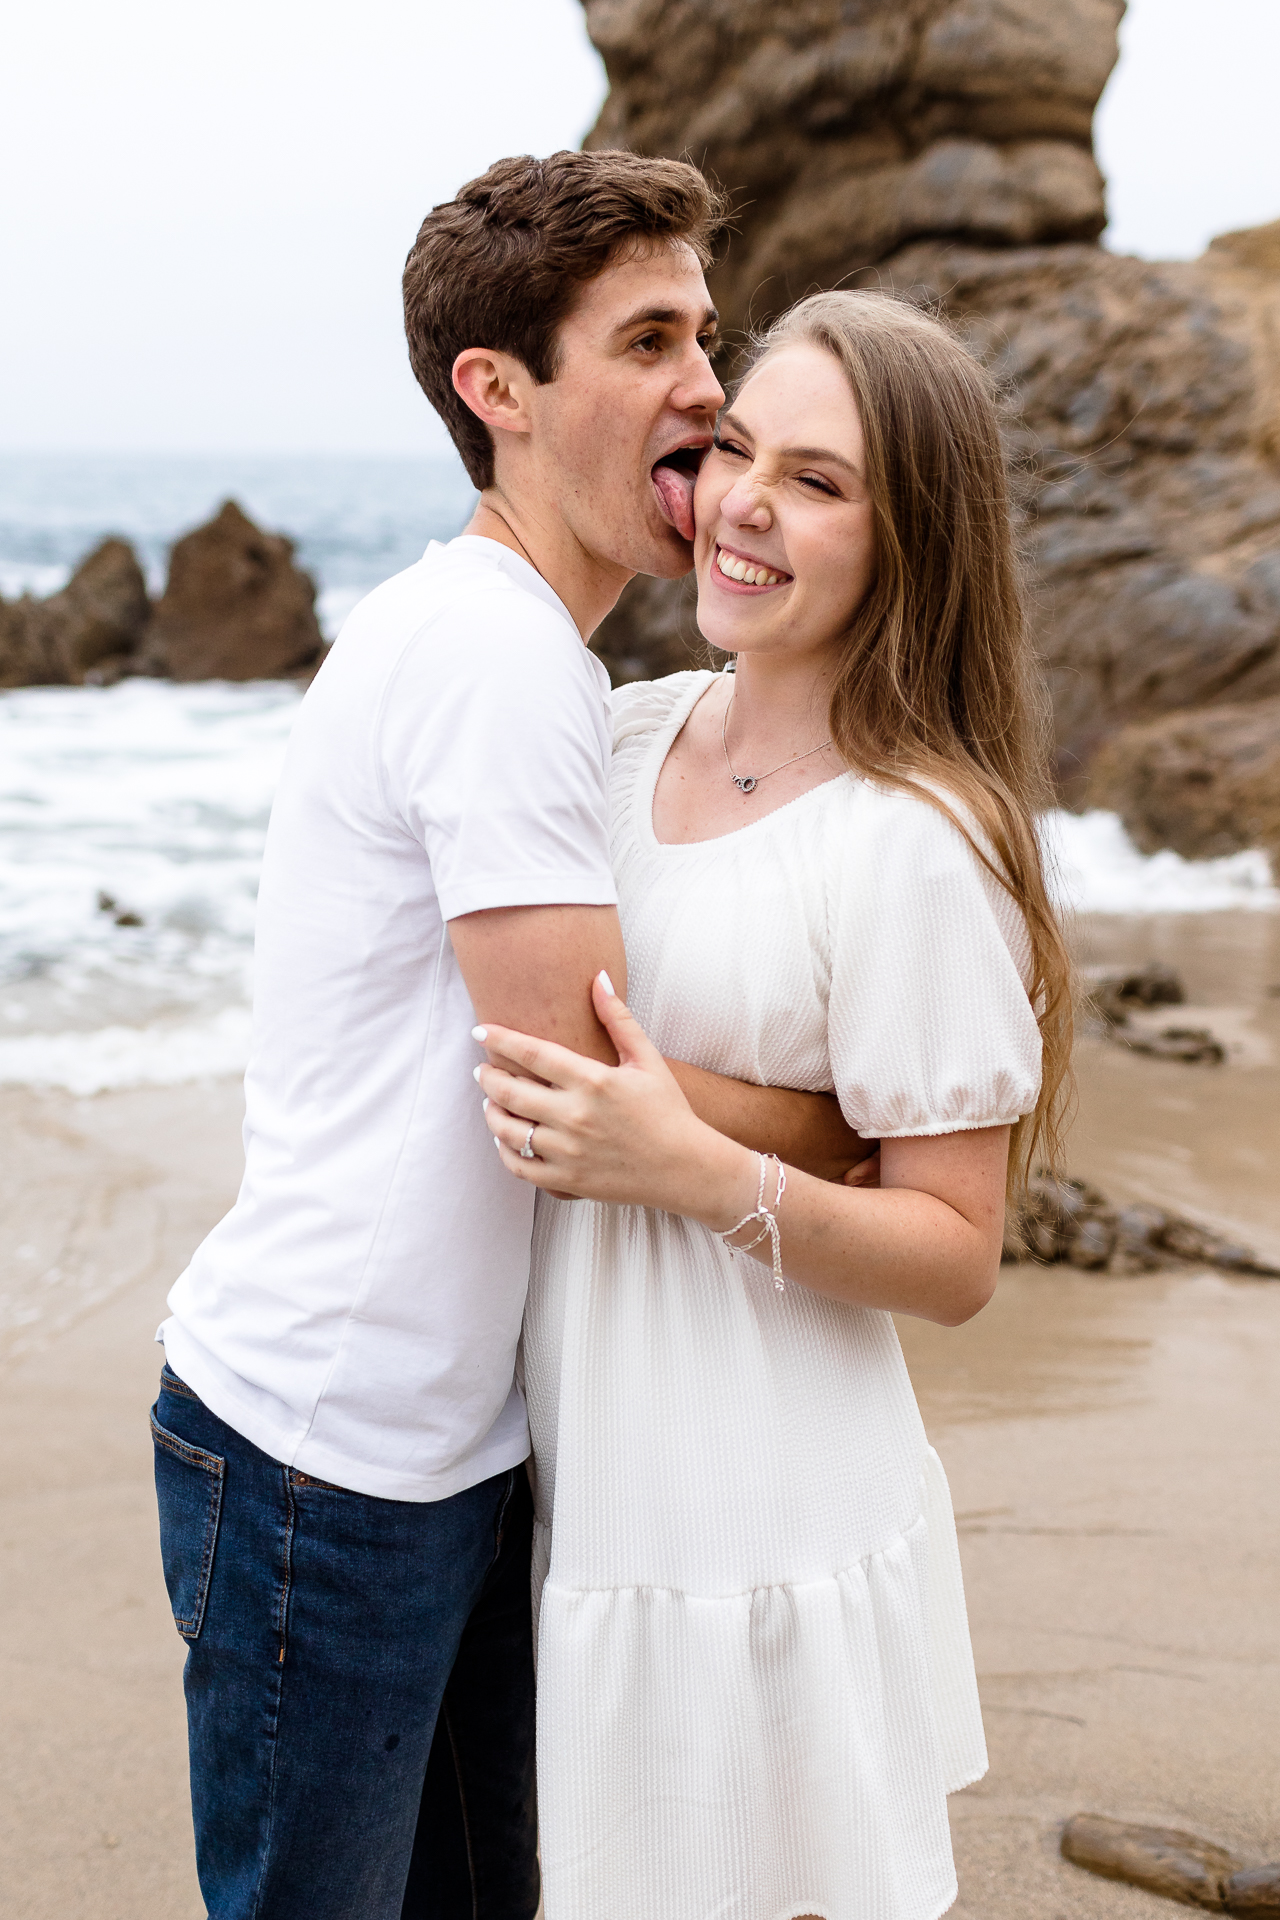 Newport Beach engagement session, rocky beach couples photography